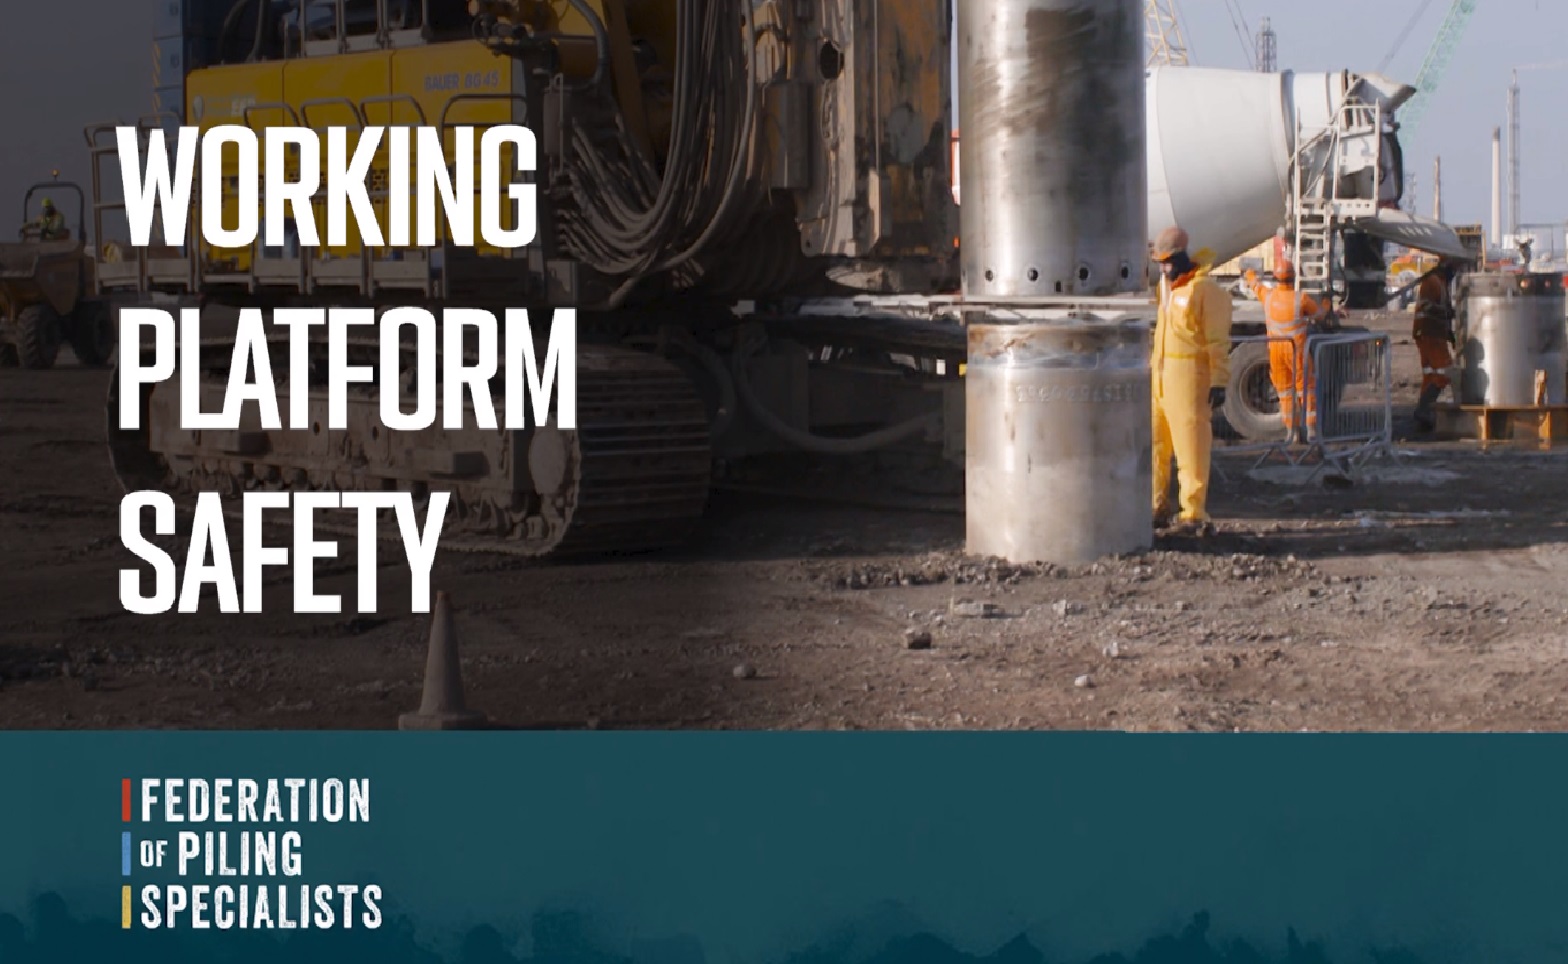 Copy of Working Platform Safety Video Launched by FPS #industrynews